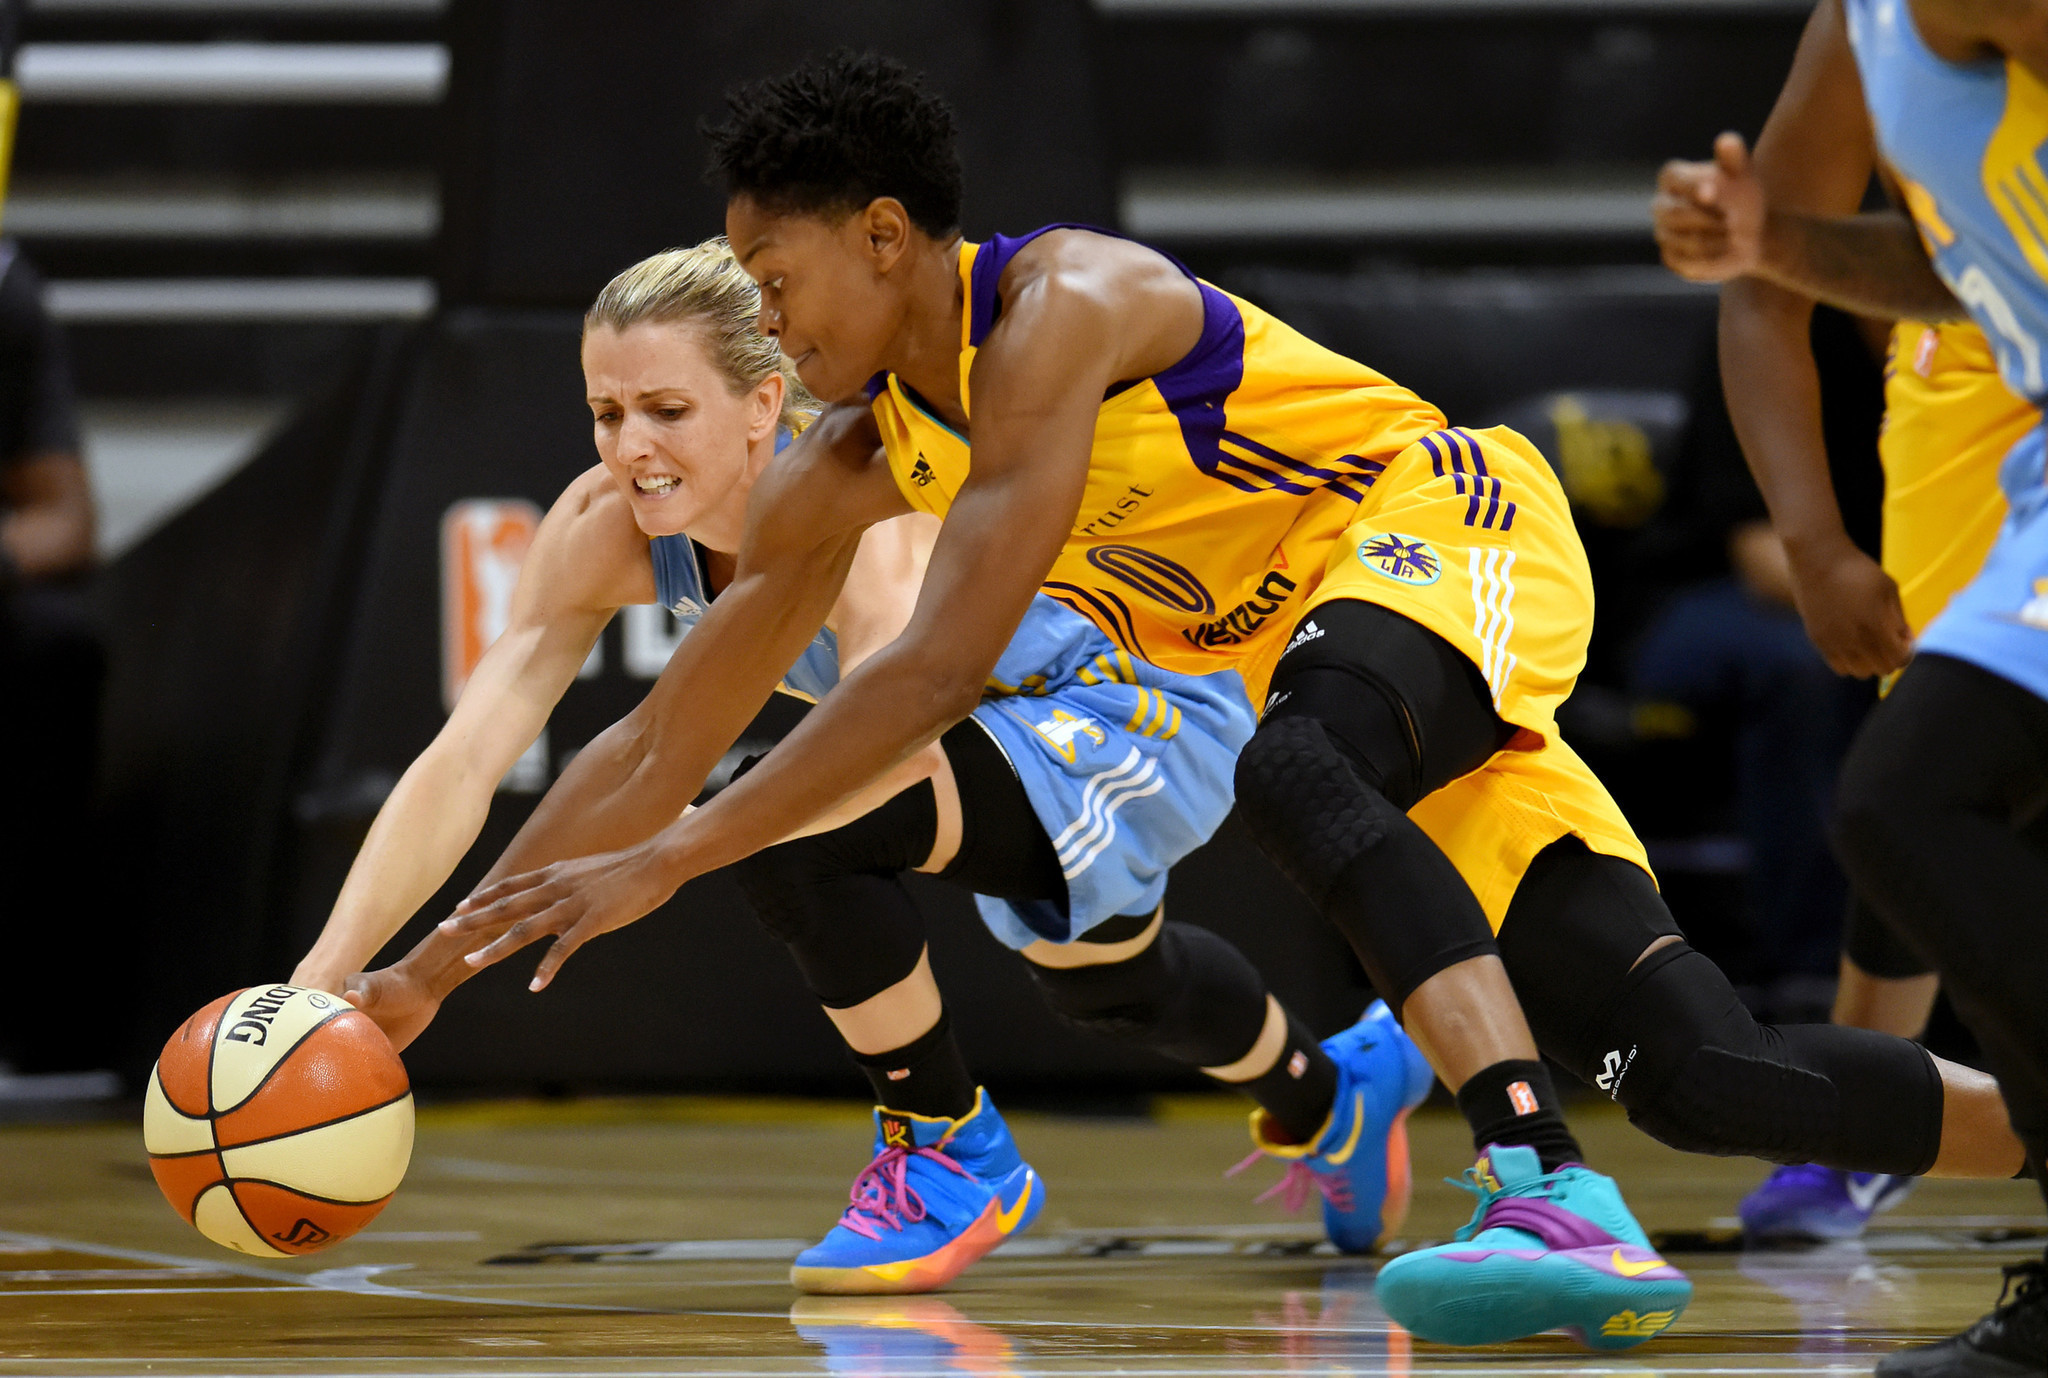 Sky lose Game 1 of WNBA semifinals to Sparks